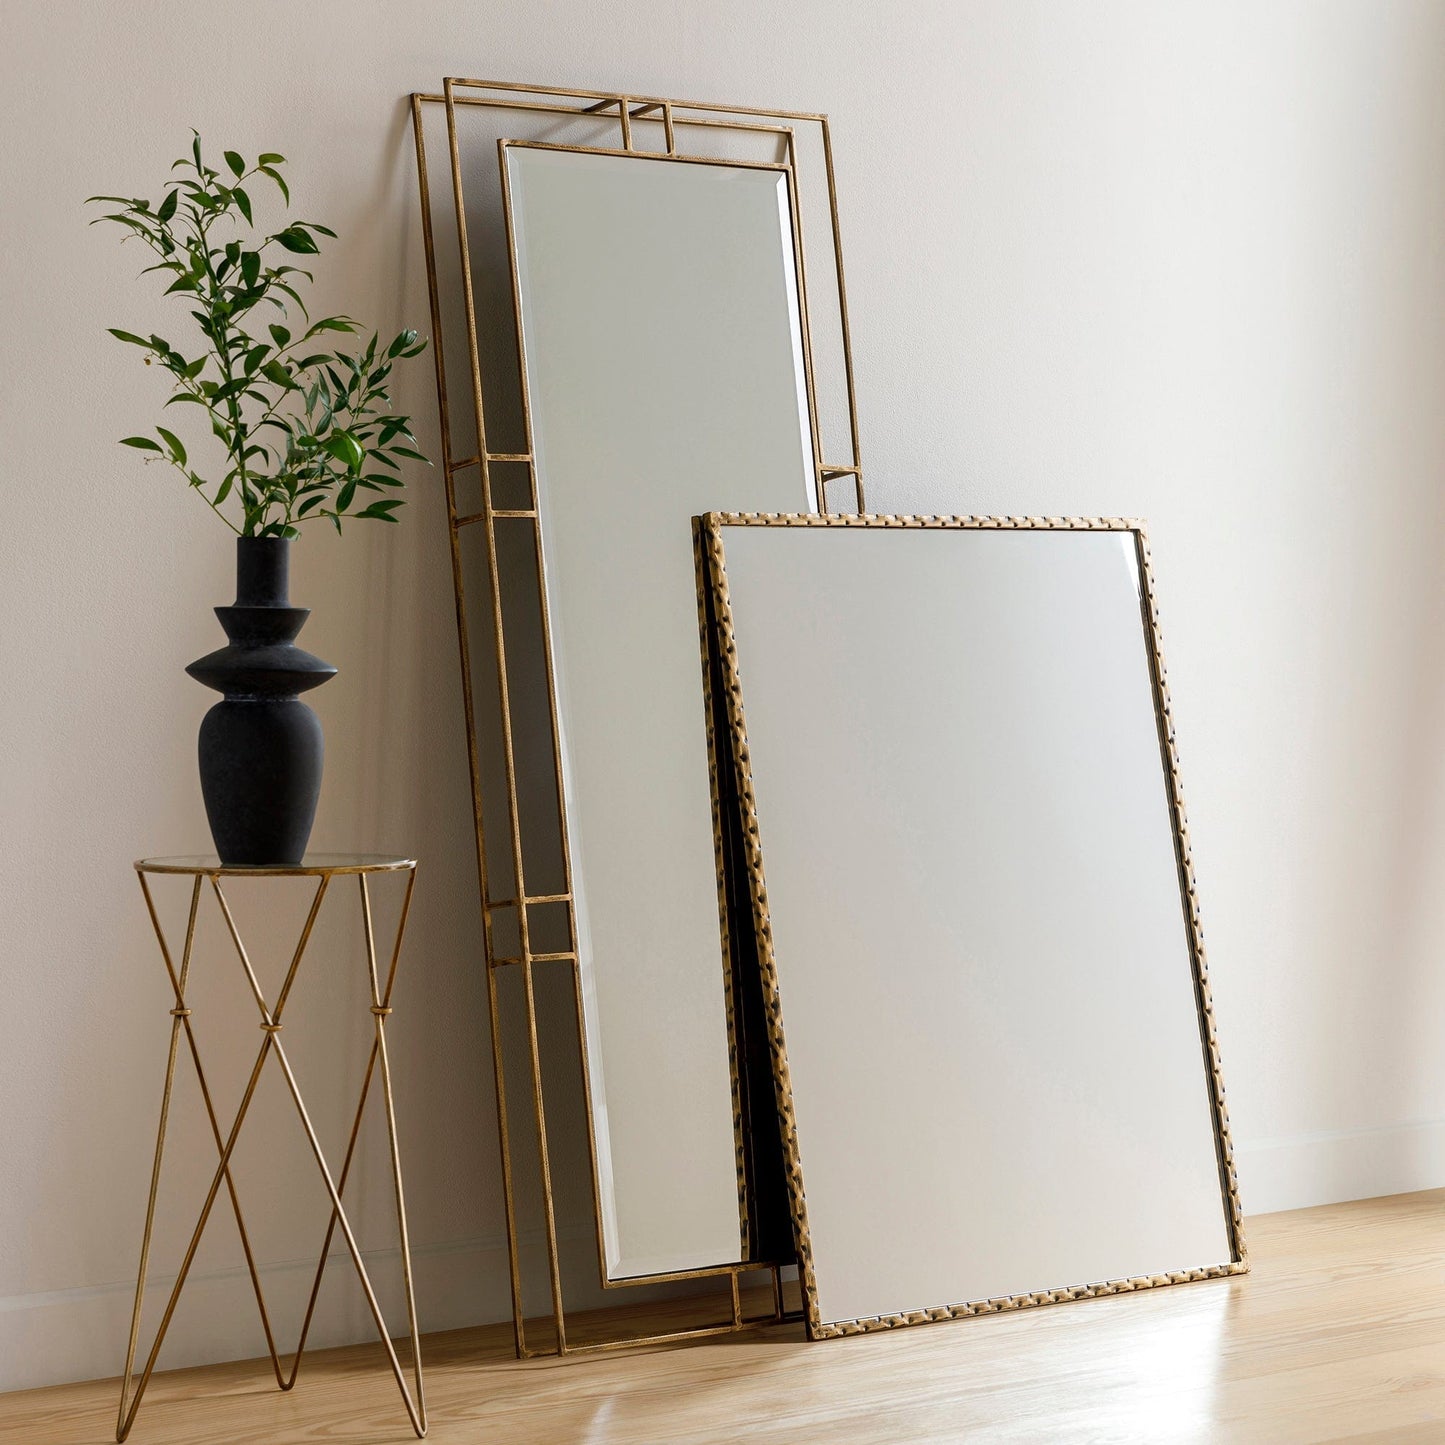 Surya Alpenglow Full-Length Wall Mirror 24W x 60H Lifestyle Pic